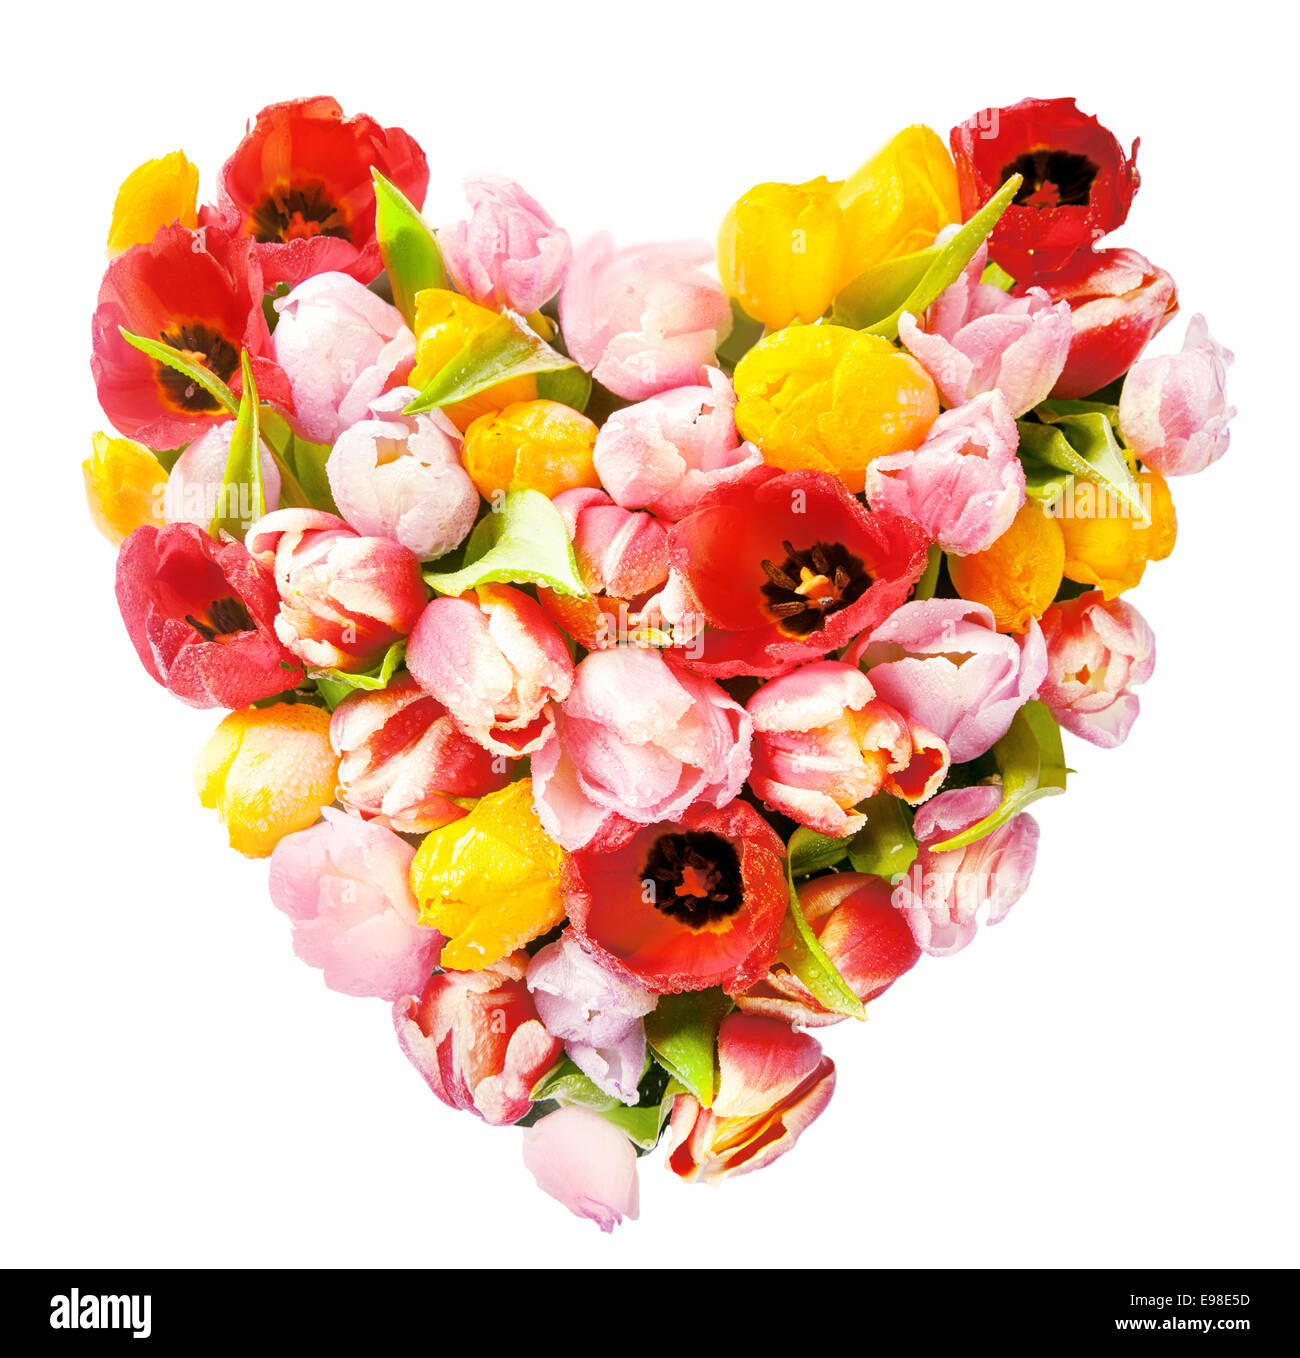 Heart-shaped arrangement of colourful fresh tulips symbolic of love and romance isolated on white in square format for a sweetheart or loved one Stock Photo